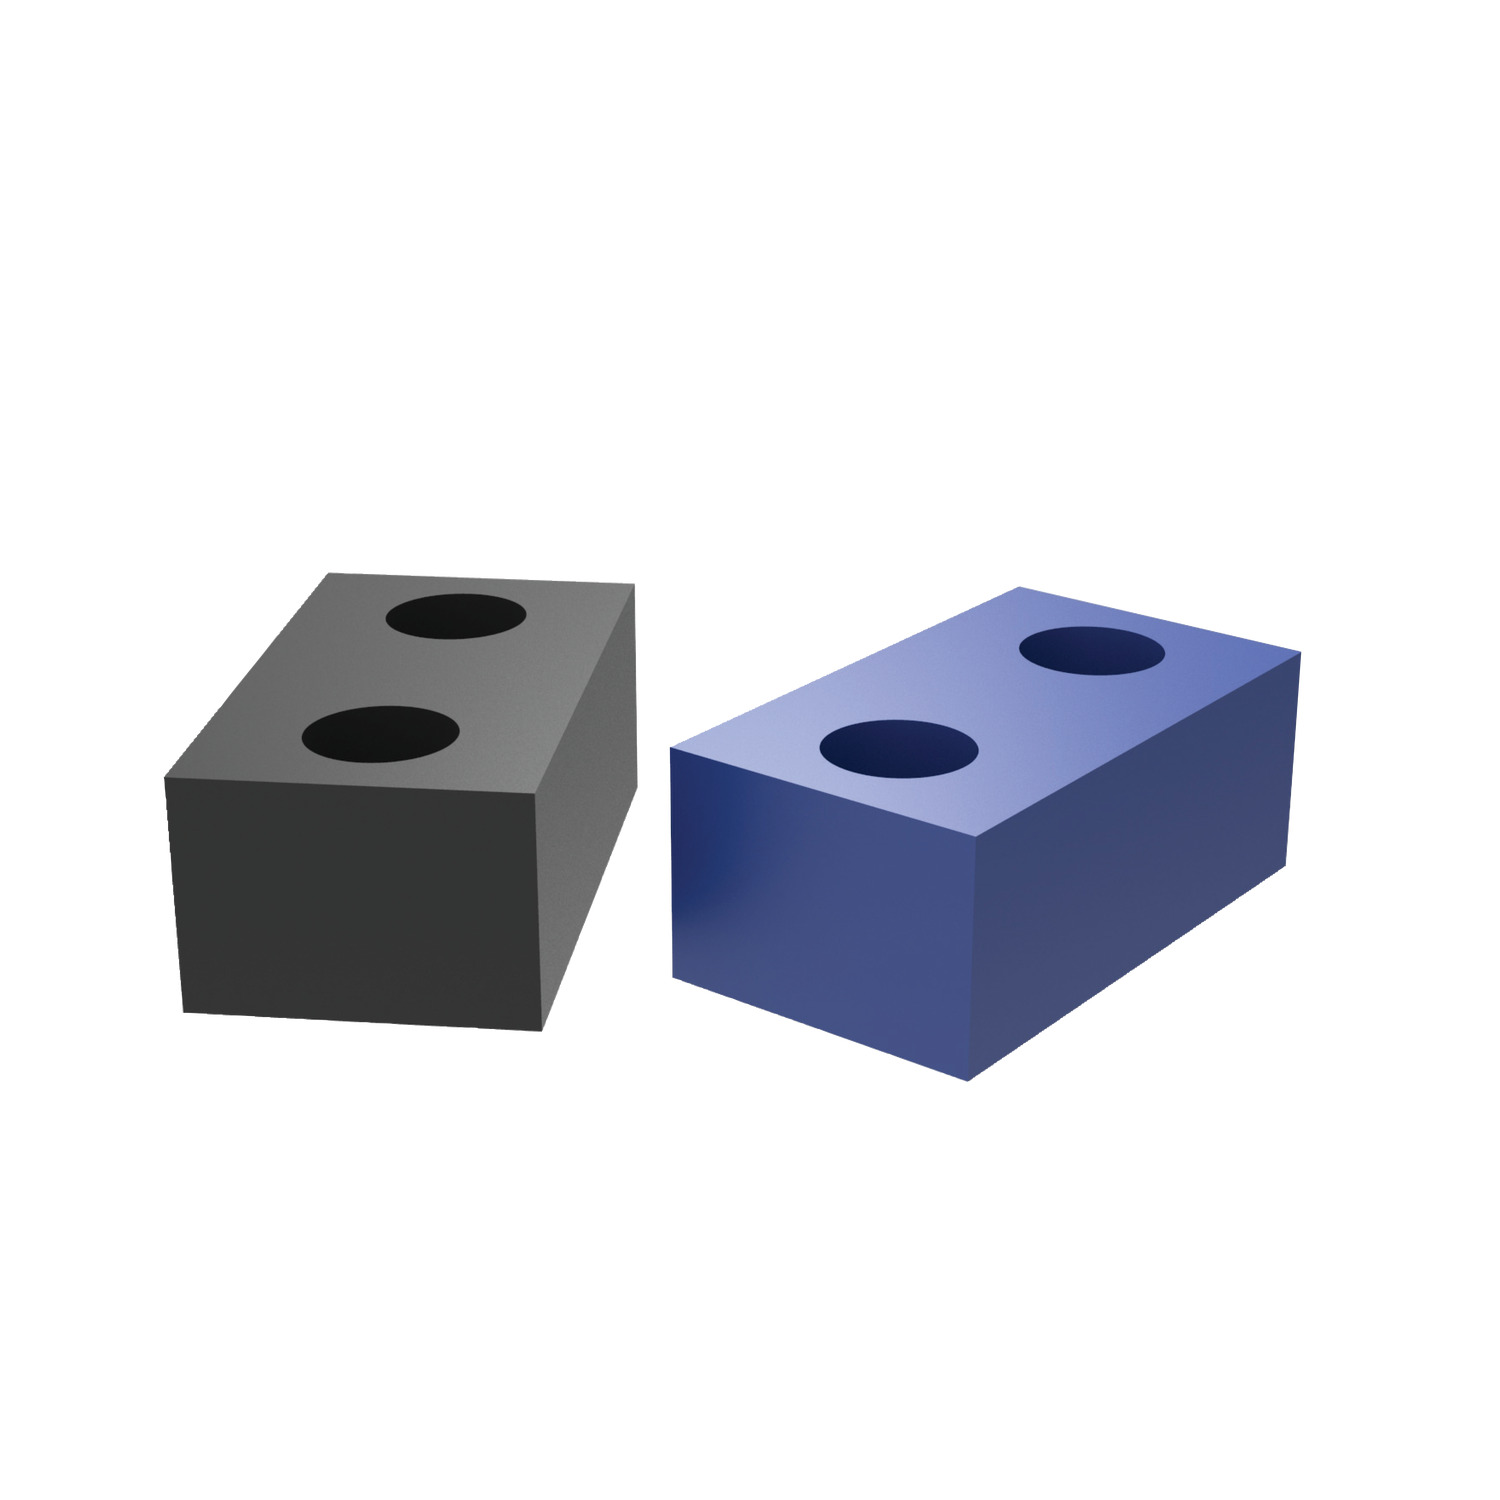 Metric Bumpers - Rectangular and Square Supplied in metric sizes of up to 63mm. Stocked in black neoprene and urethane with heat resistance from -18o to +90o Celsius. Ideal for part protection through stages of manufacture.